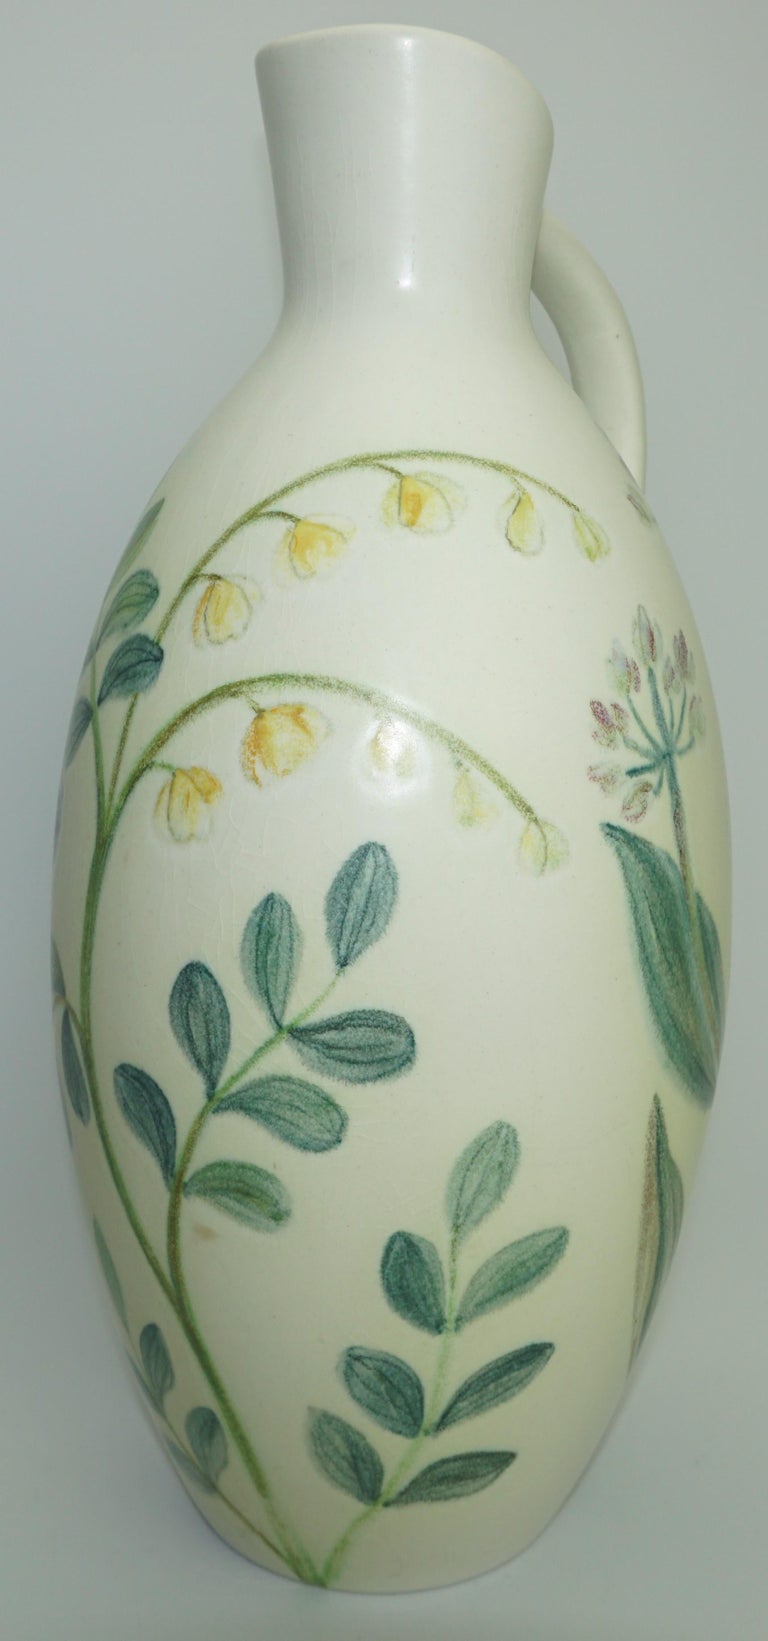 Decorative vase by Carl-Harry Stalhane, Sweden, C 1950. Beautiful floral pattern. Very good condition.